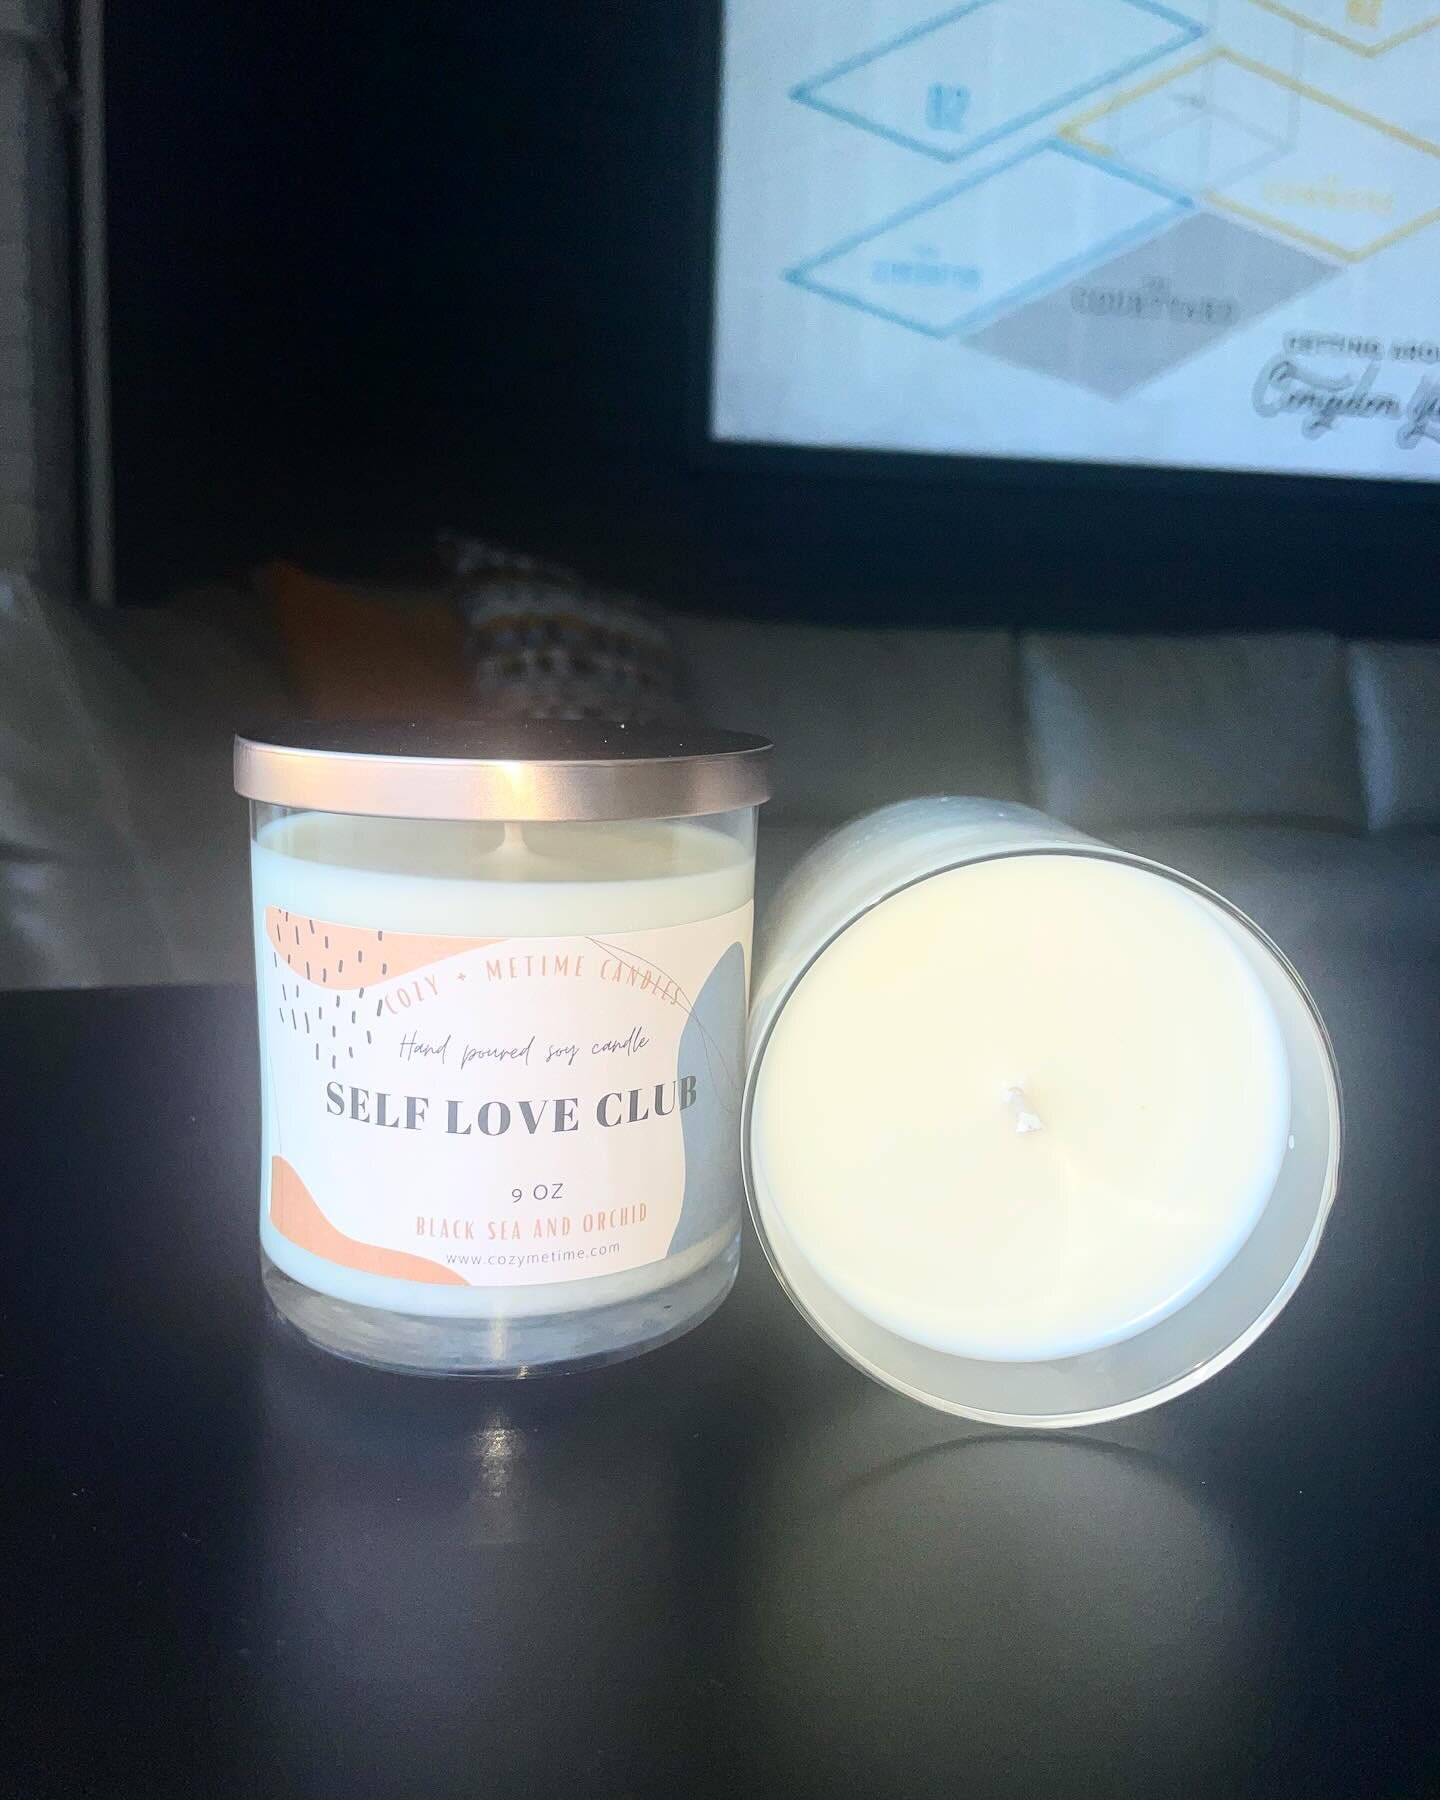 Self Love: Salty oceanic accords combine with dark musk and sandalwood to fill your space with this balanced, airy yet floral scent. The ideal year-round candle that makes an excellent addition to any space. Available online Www.cozymetime.com